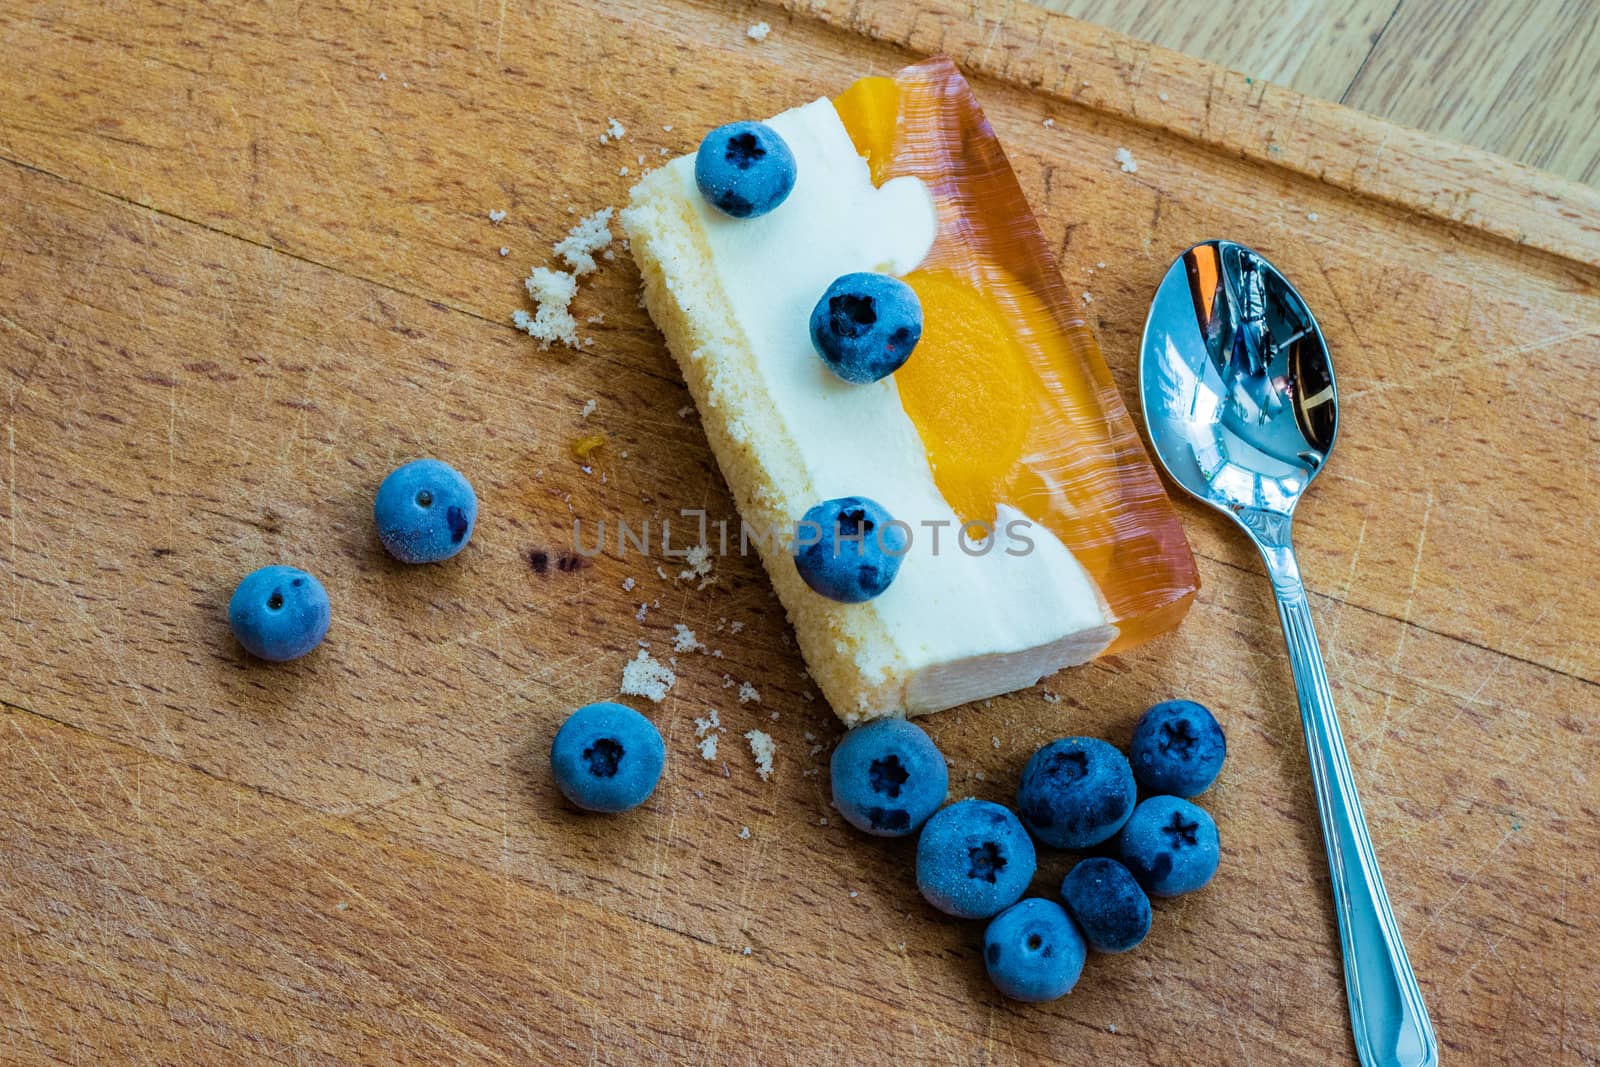 Delicious and sweet cake with blueberries. Sunny dessert on the kitchen table. Light background.